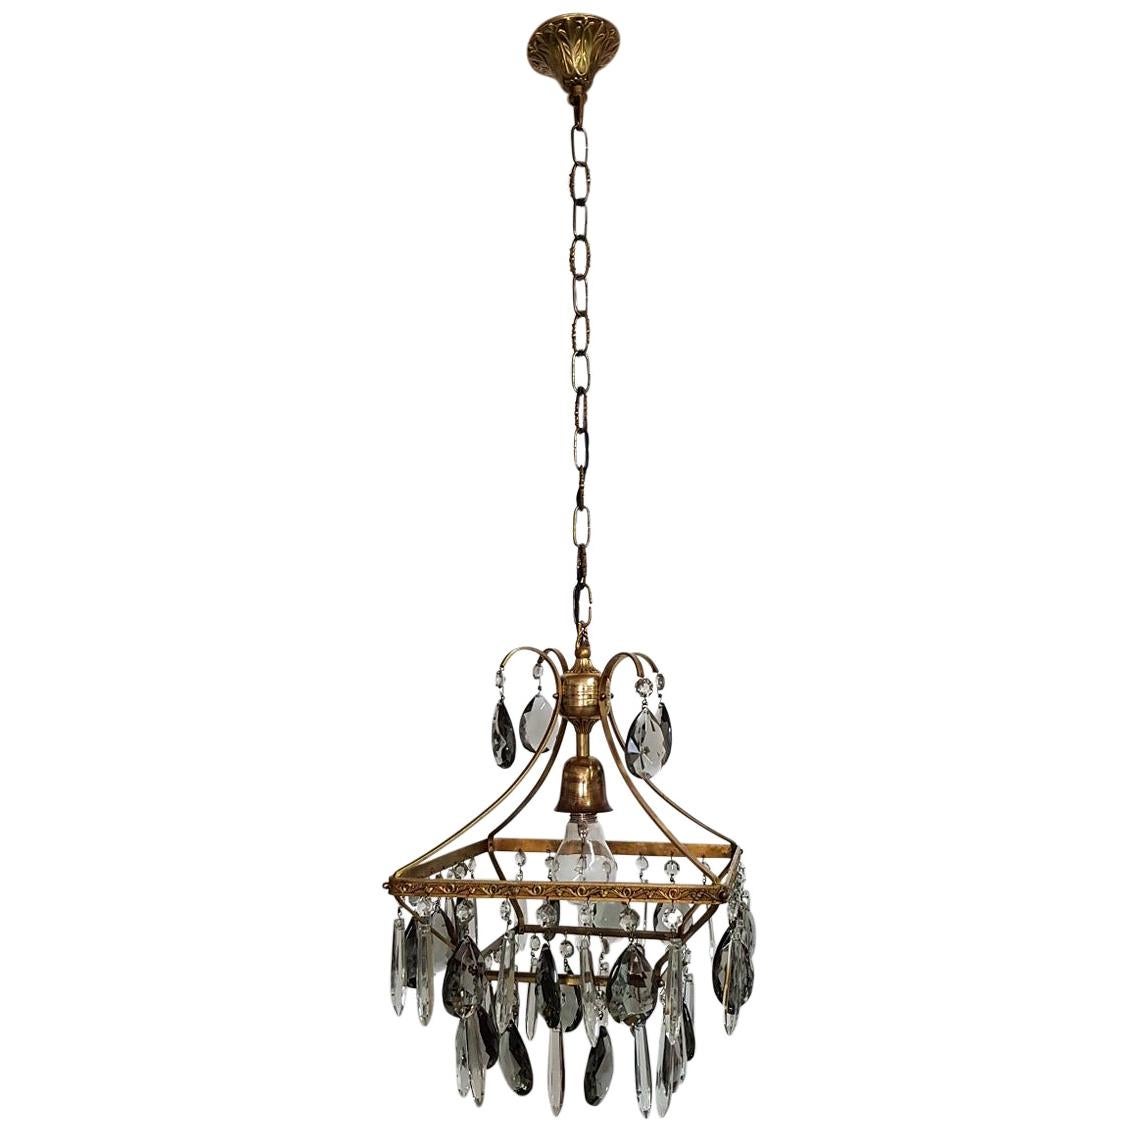 Mid-20th Century Dutch Glass Chandelier For Sale